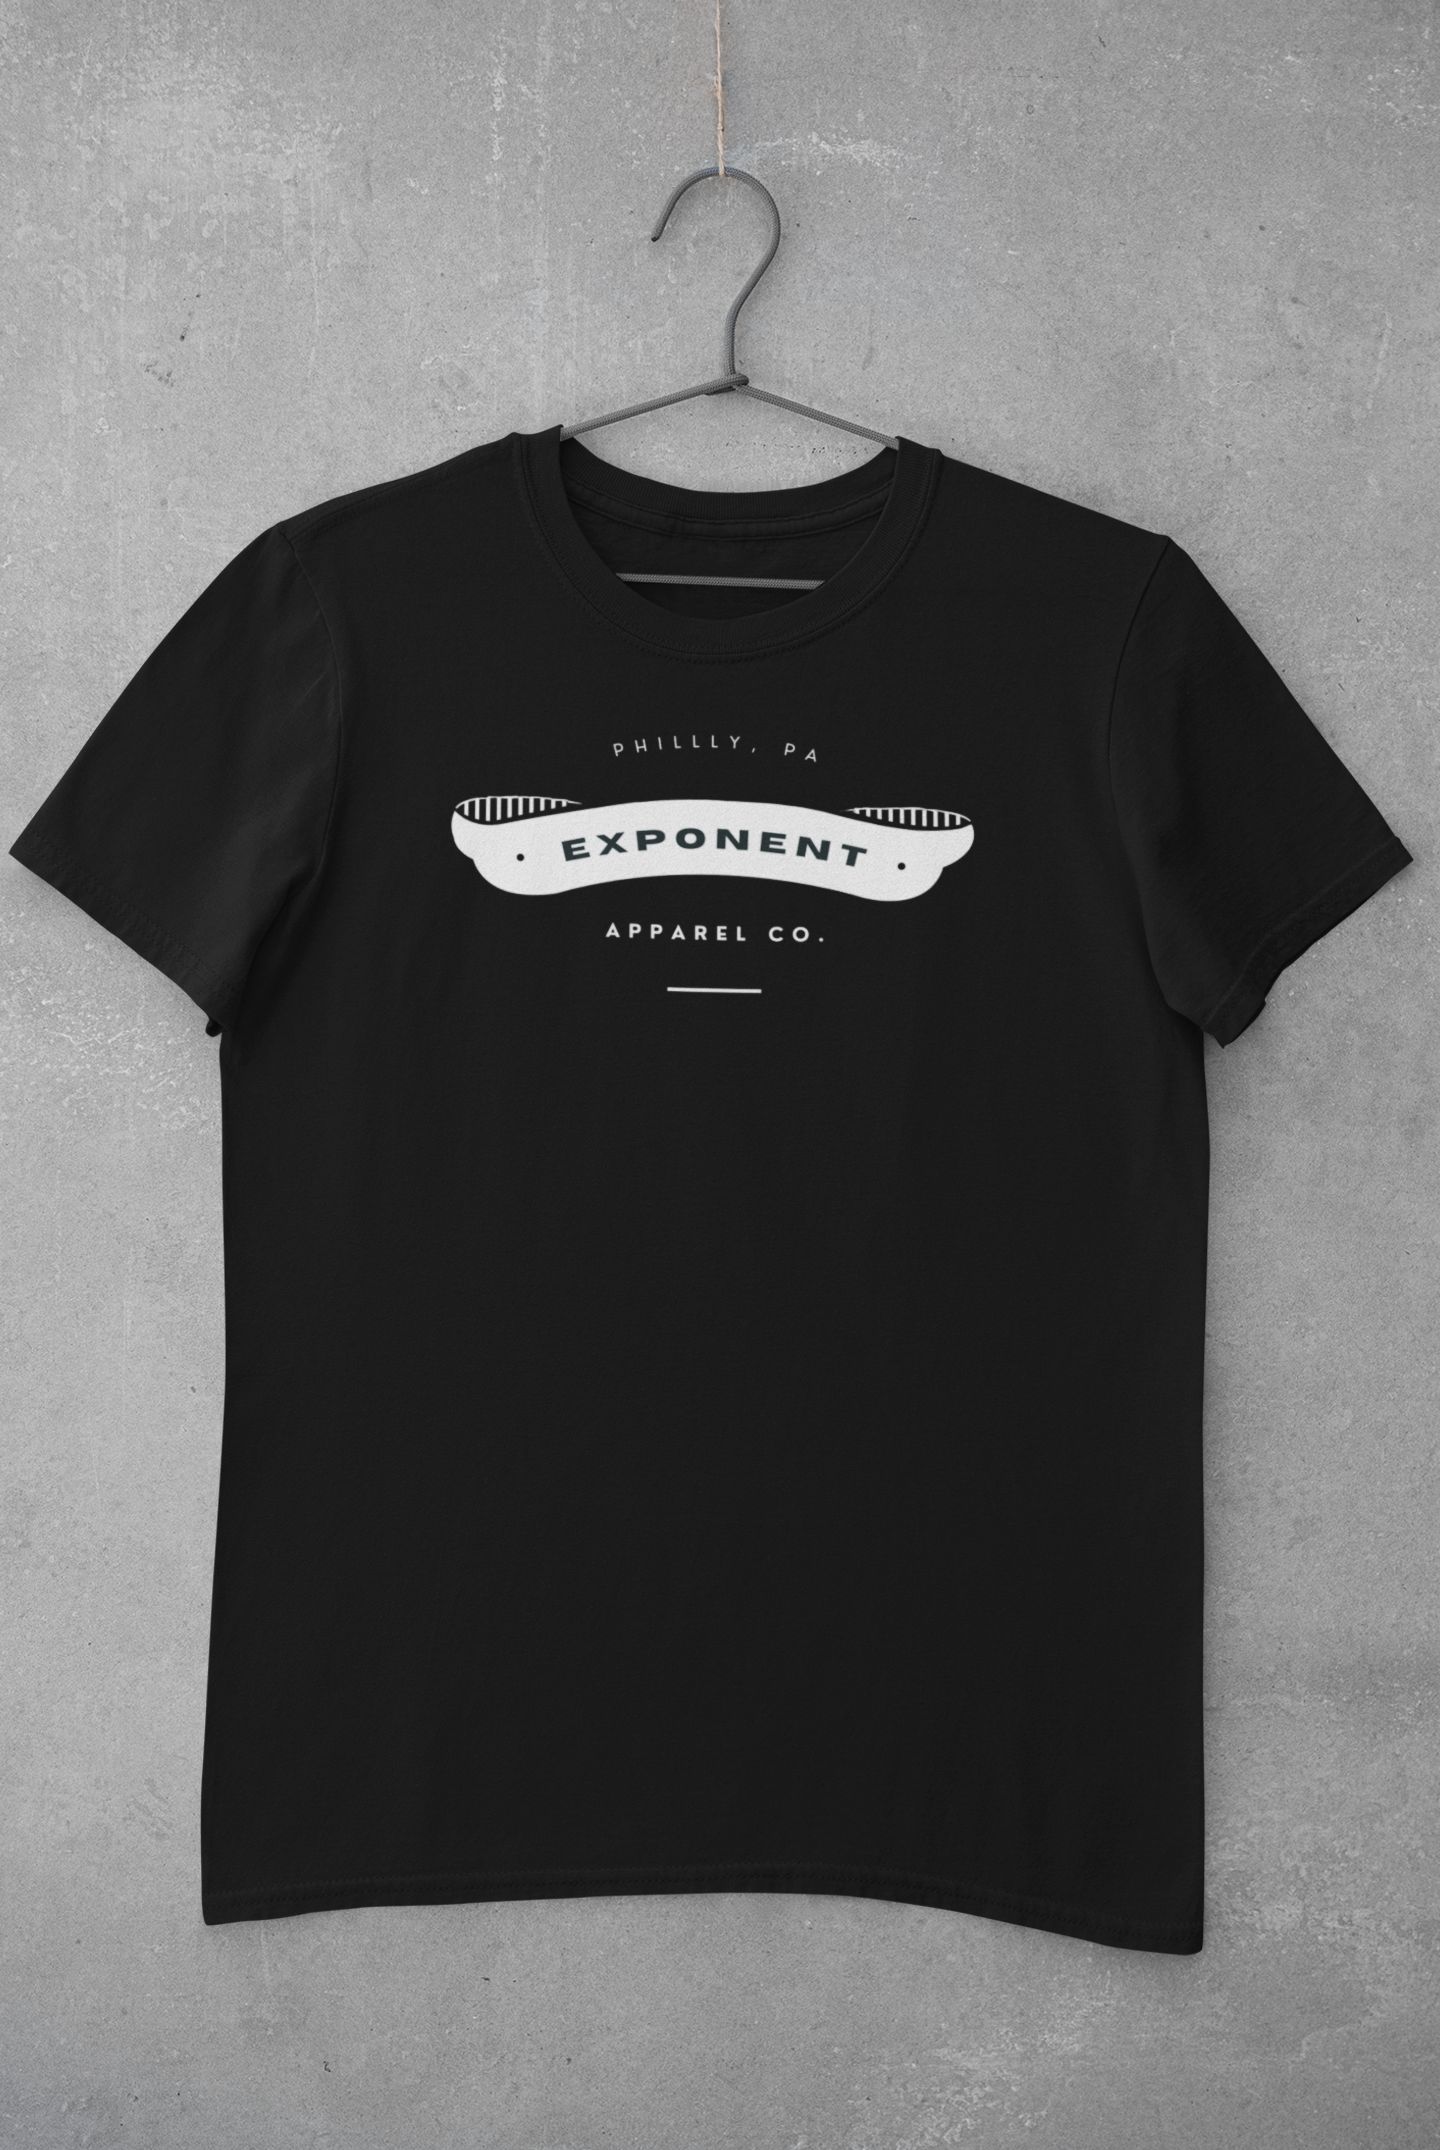 Exponent Apparel Thin White